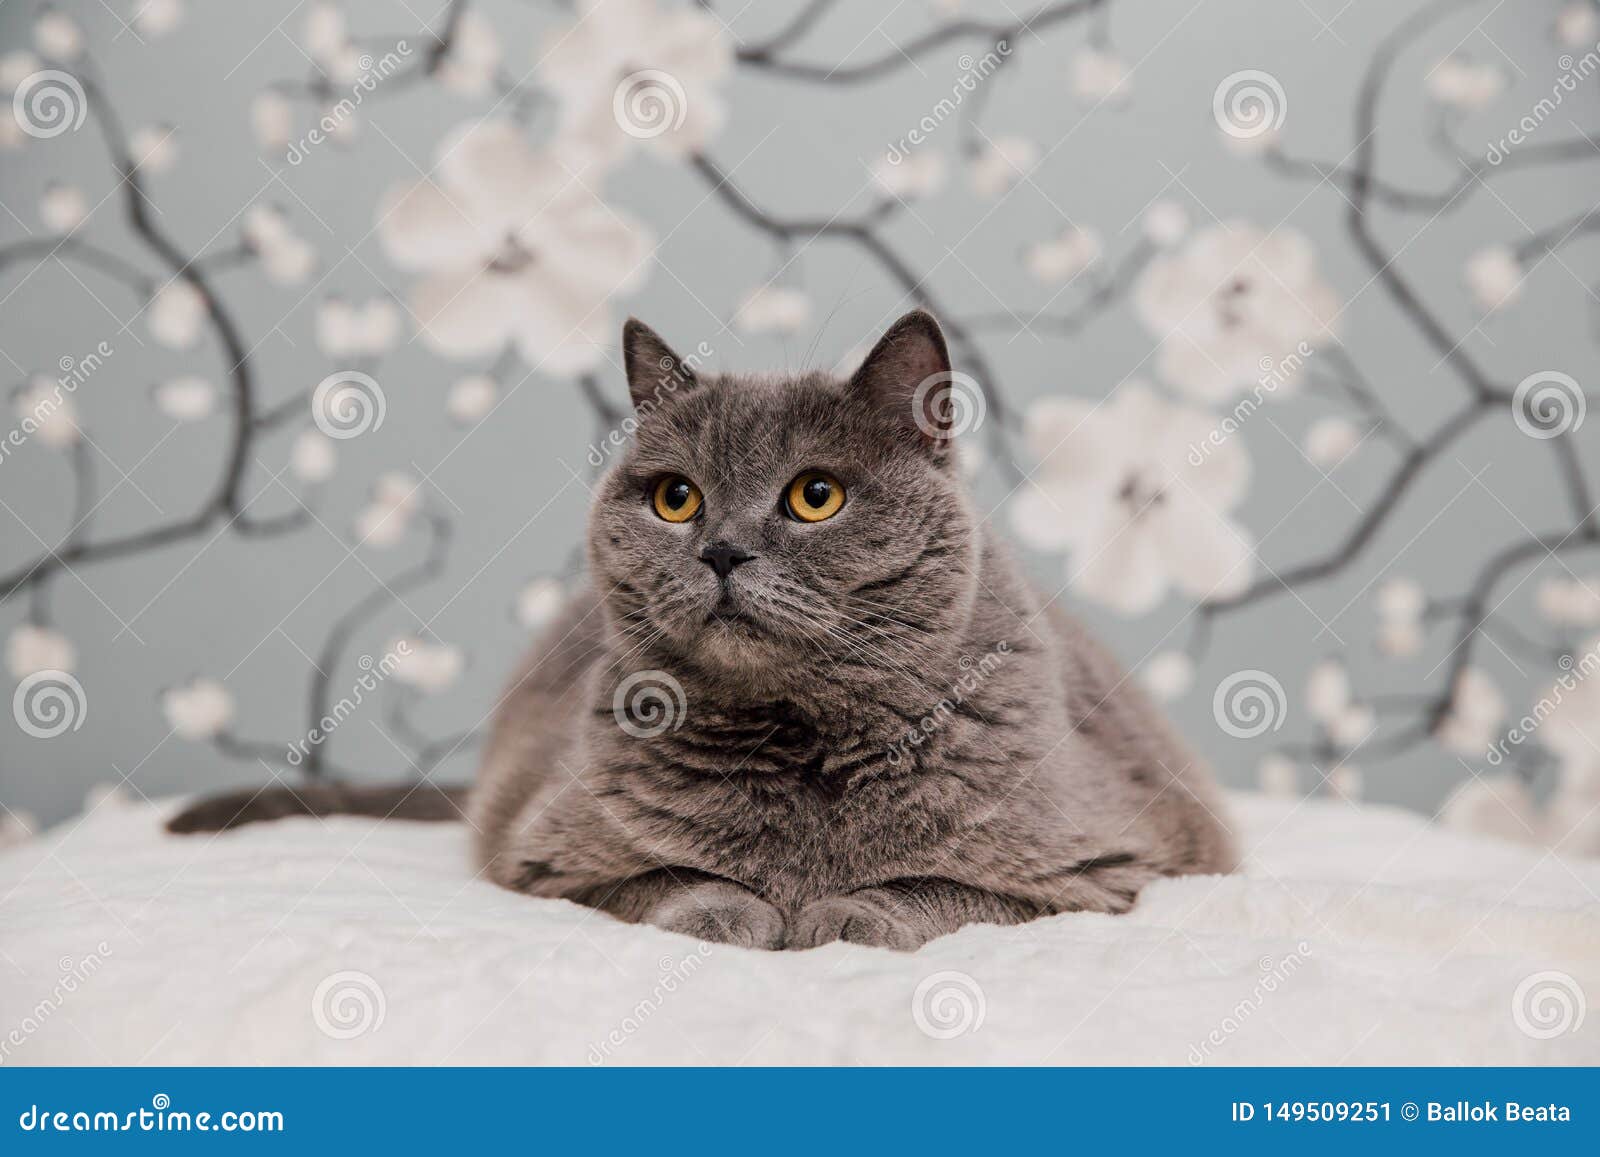 22 254 Beautiful British Shorthair Photos Free Royalty Free Stock Photos From Dreamstime